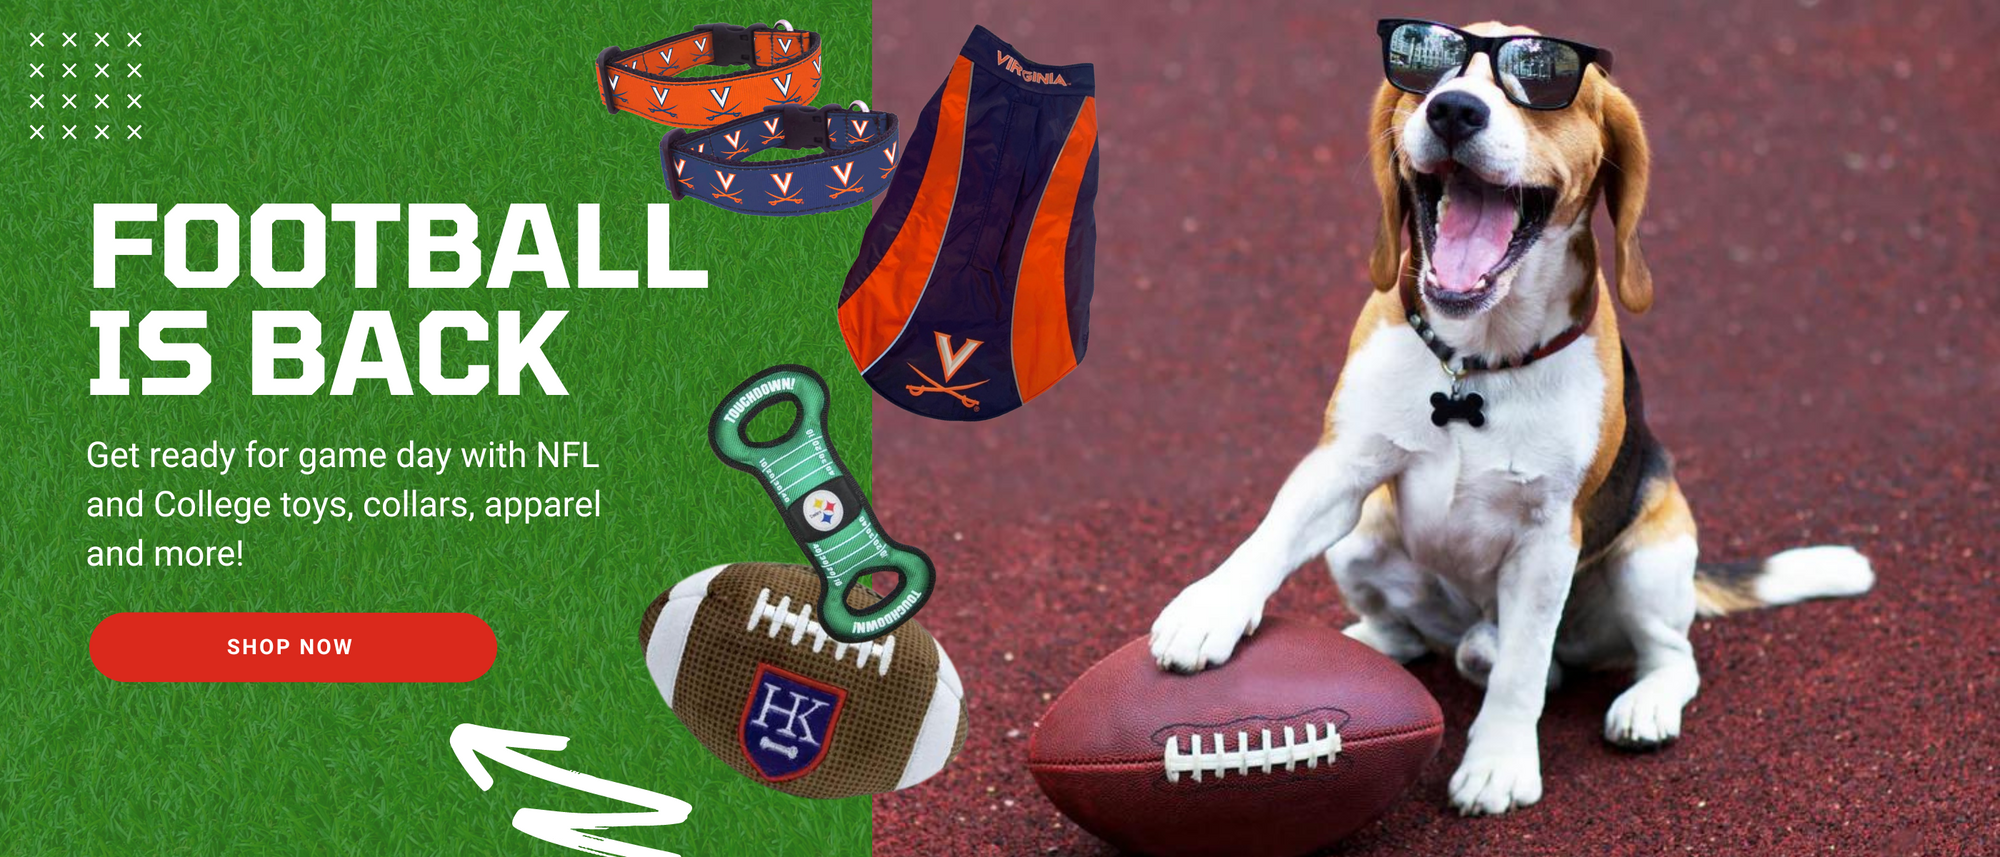 Football is back! Get ready for game day with NFL and College toys, collars, apparel and more! Shop now!